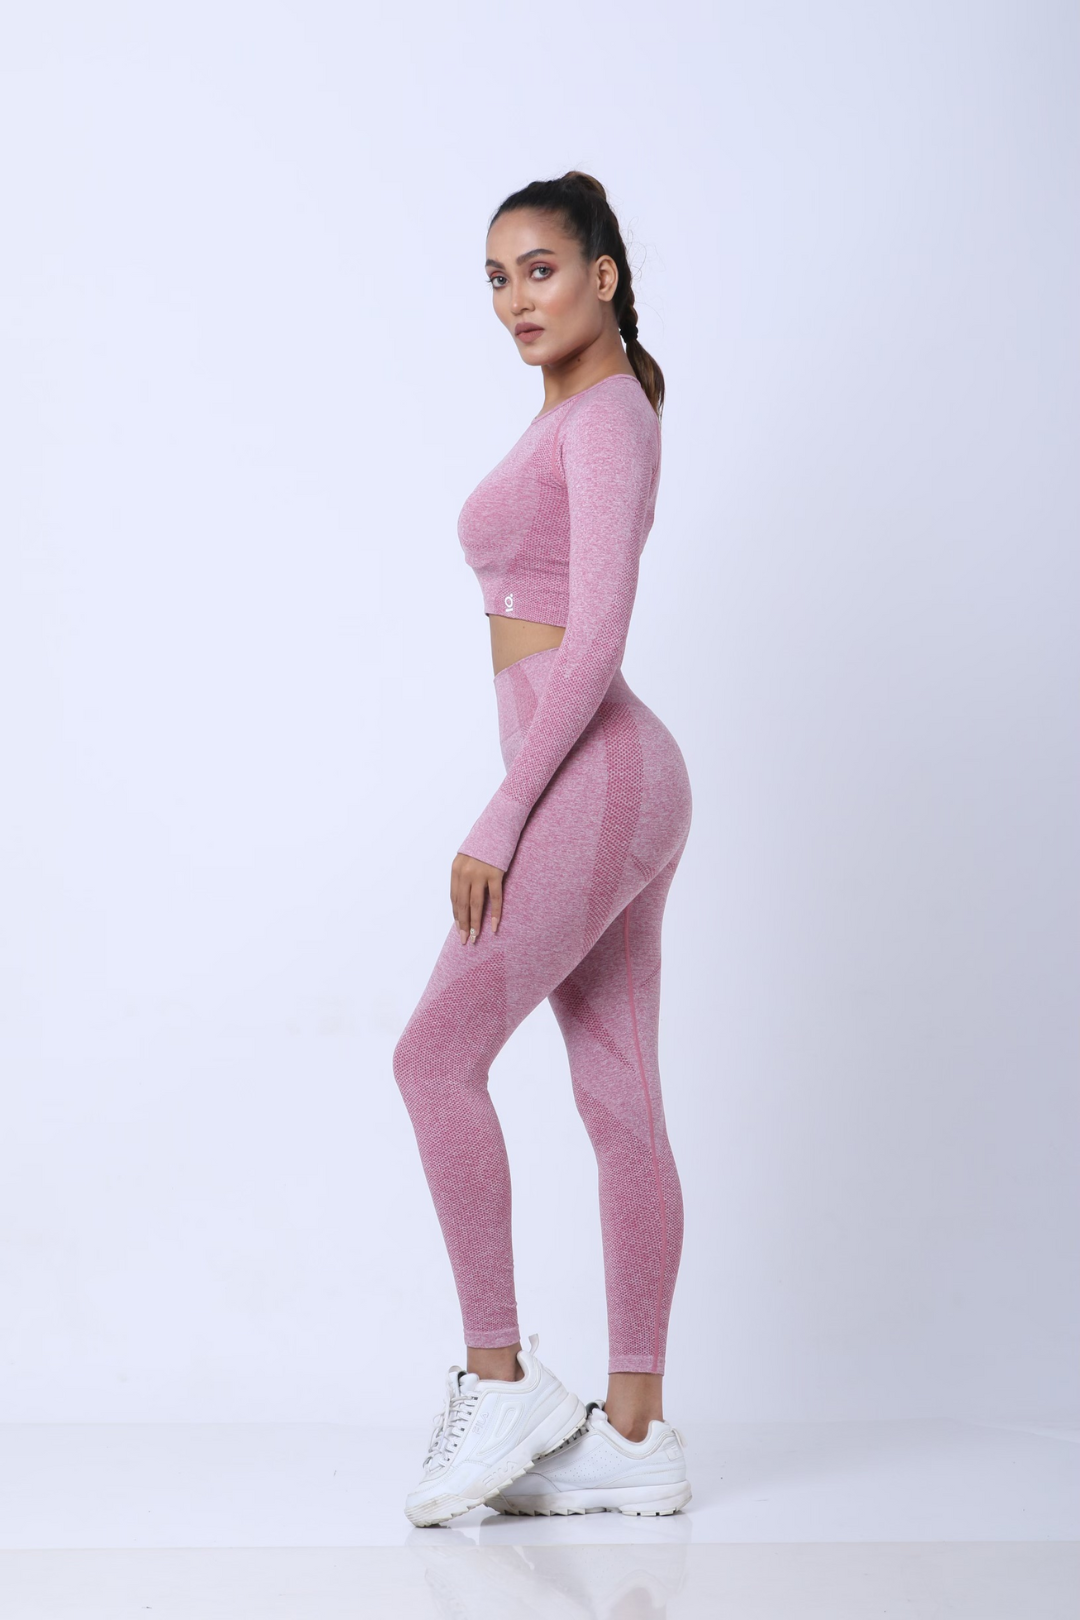 Women's Seamless Pink Workout Outfit with Long Sleeve and Legging - Shop Now